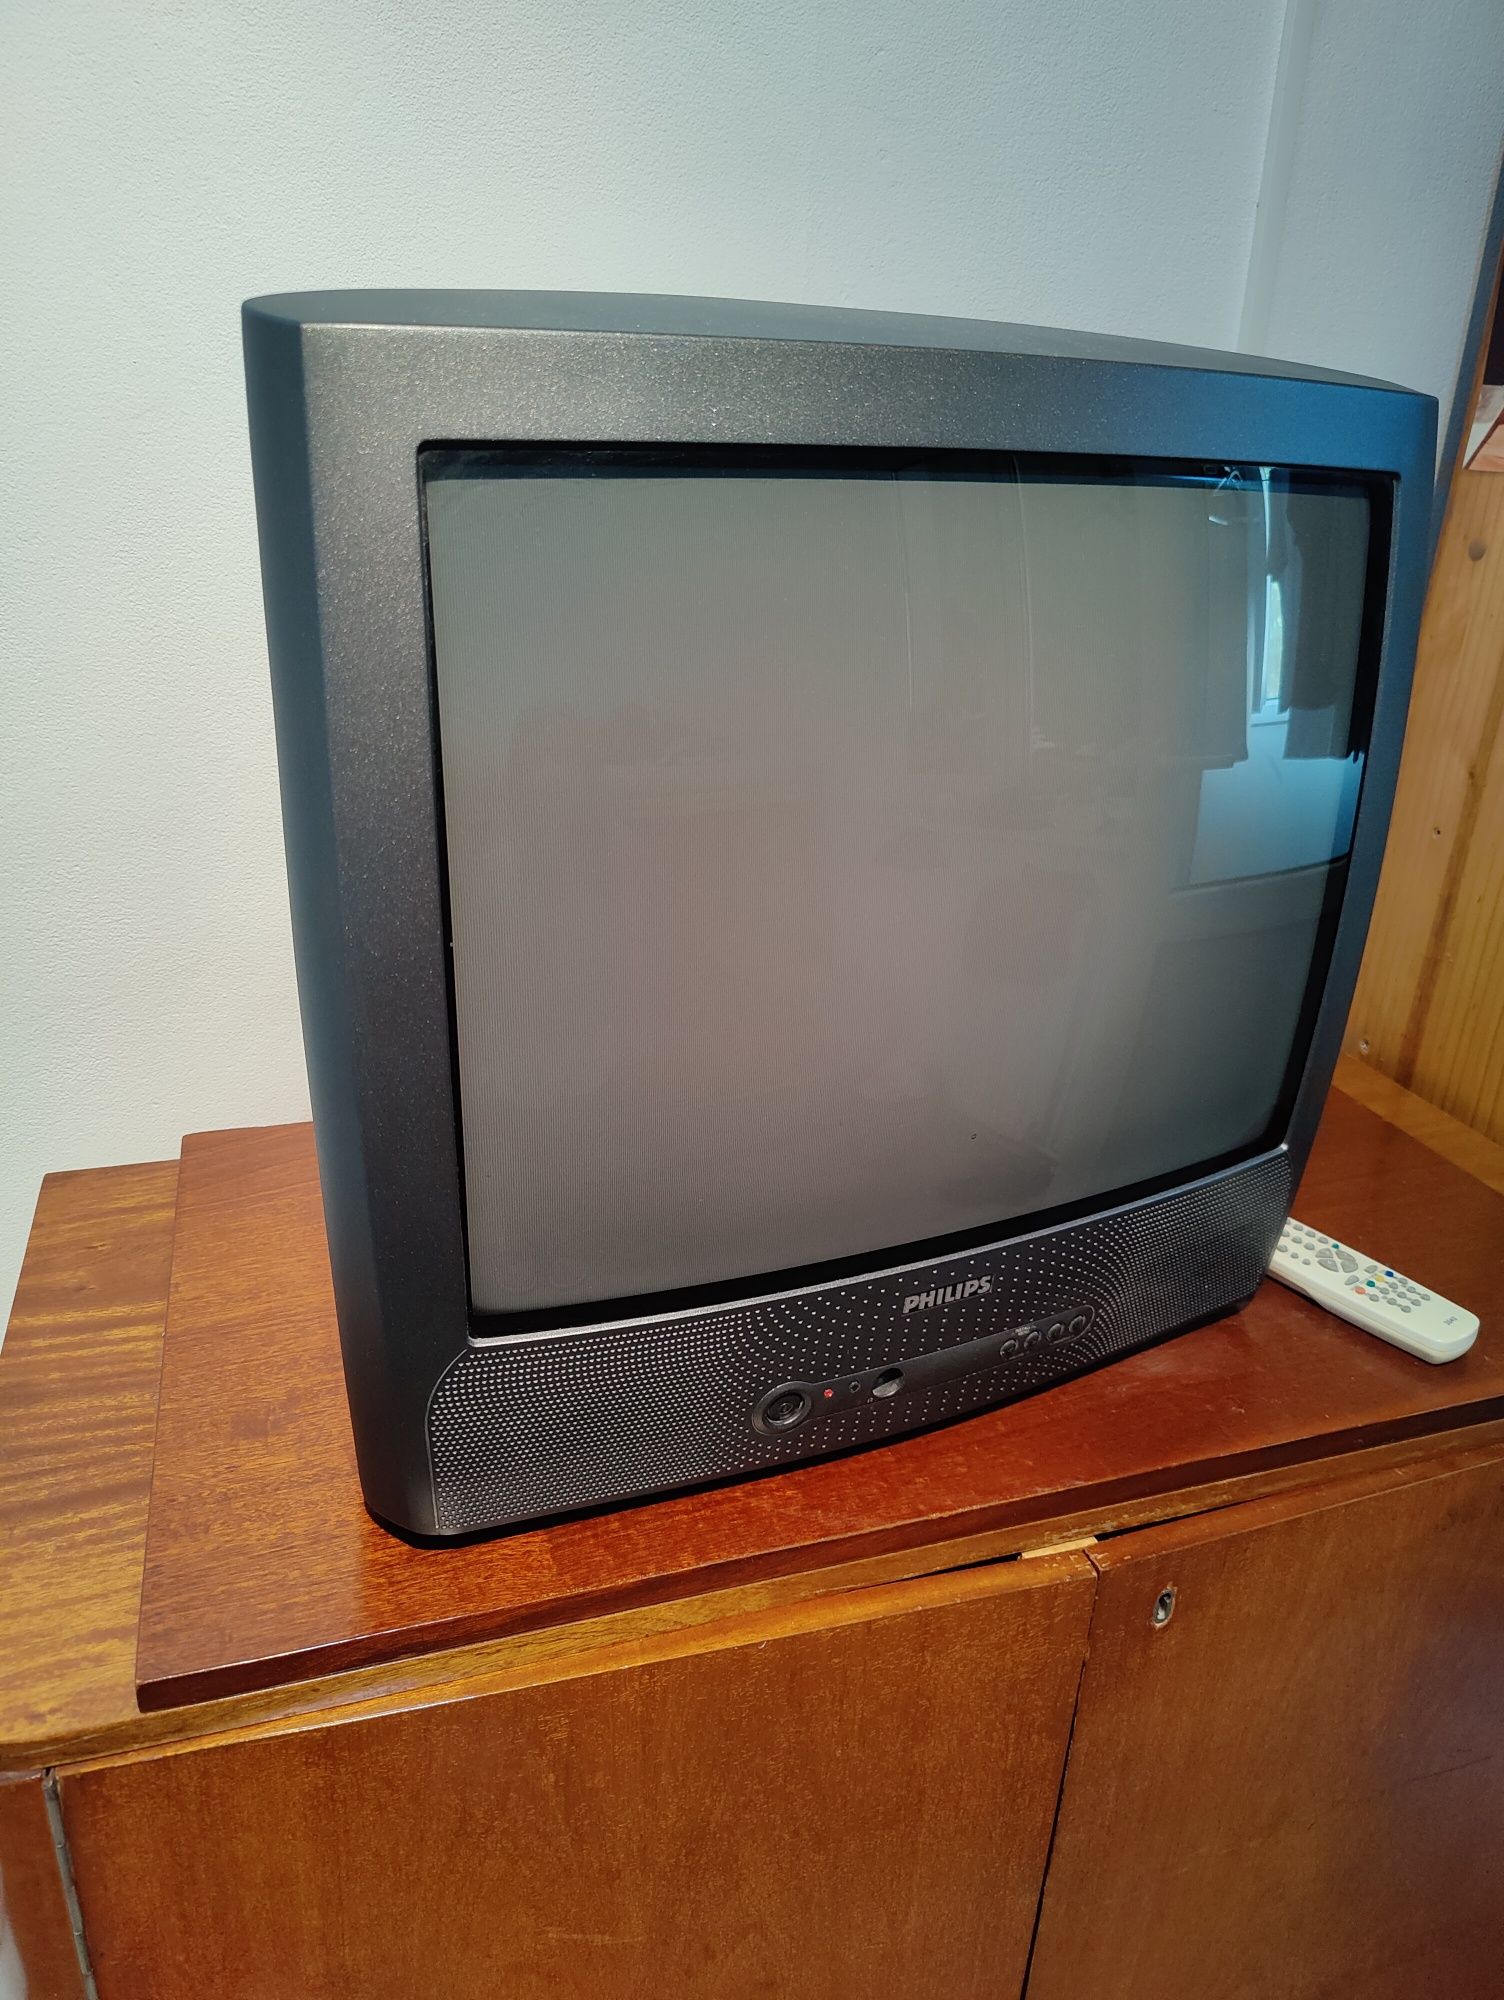 Tv Philips UVSH, made in Poland